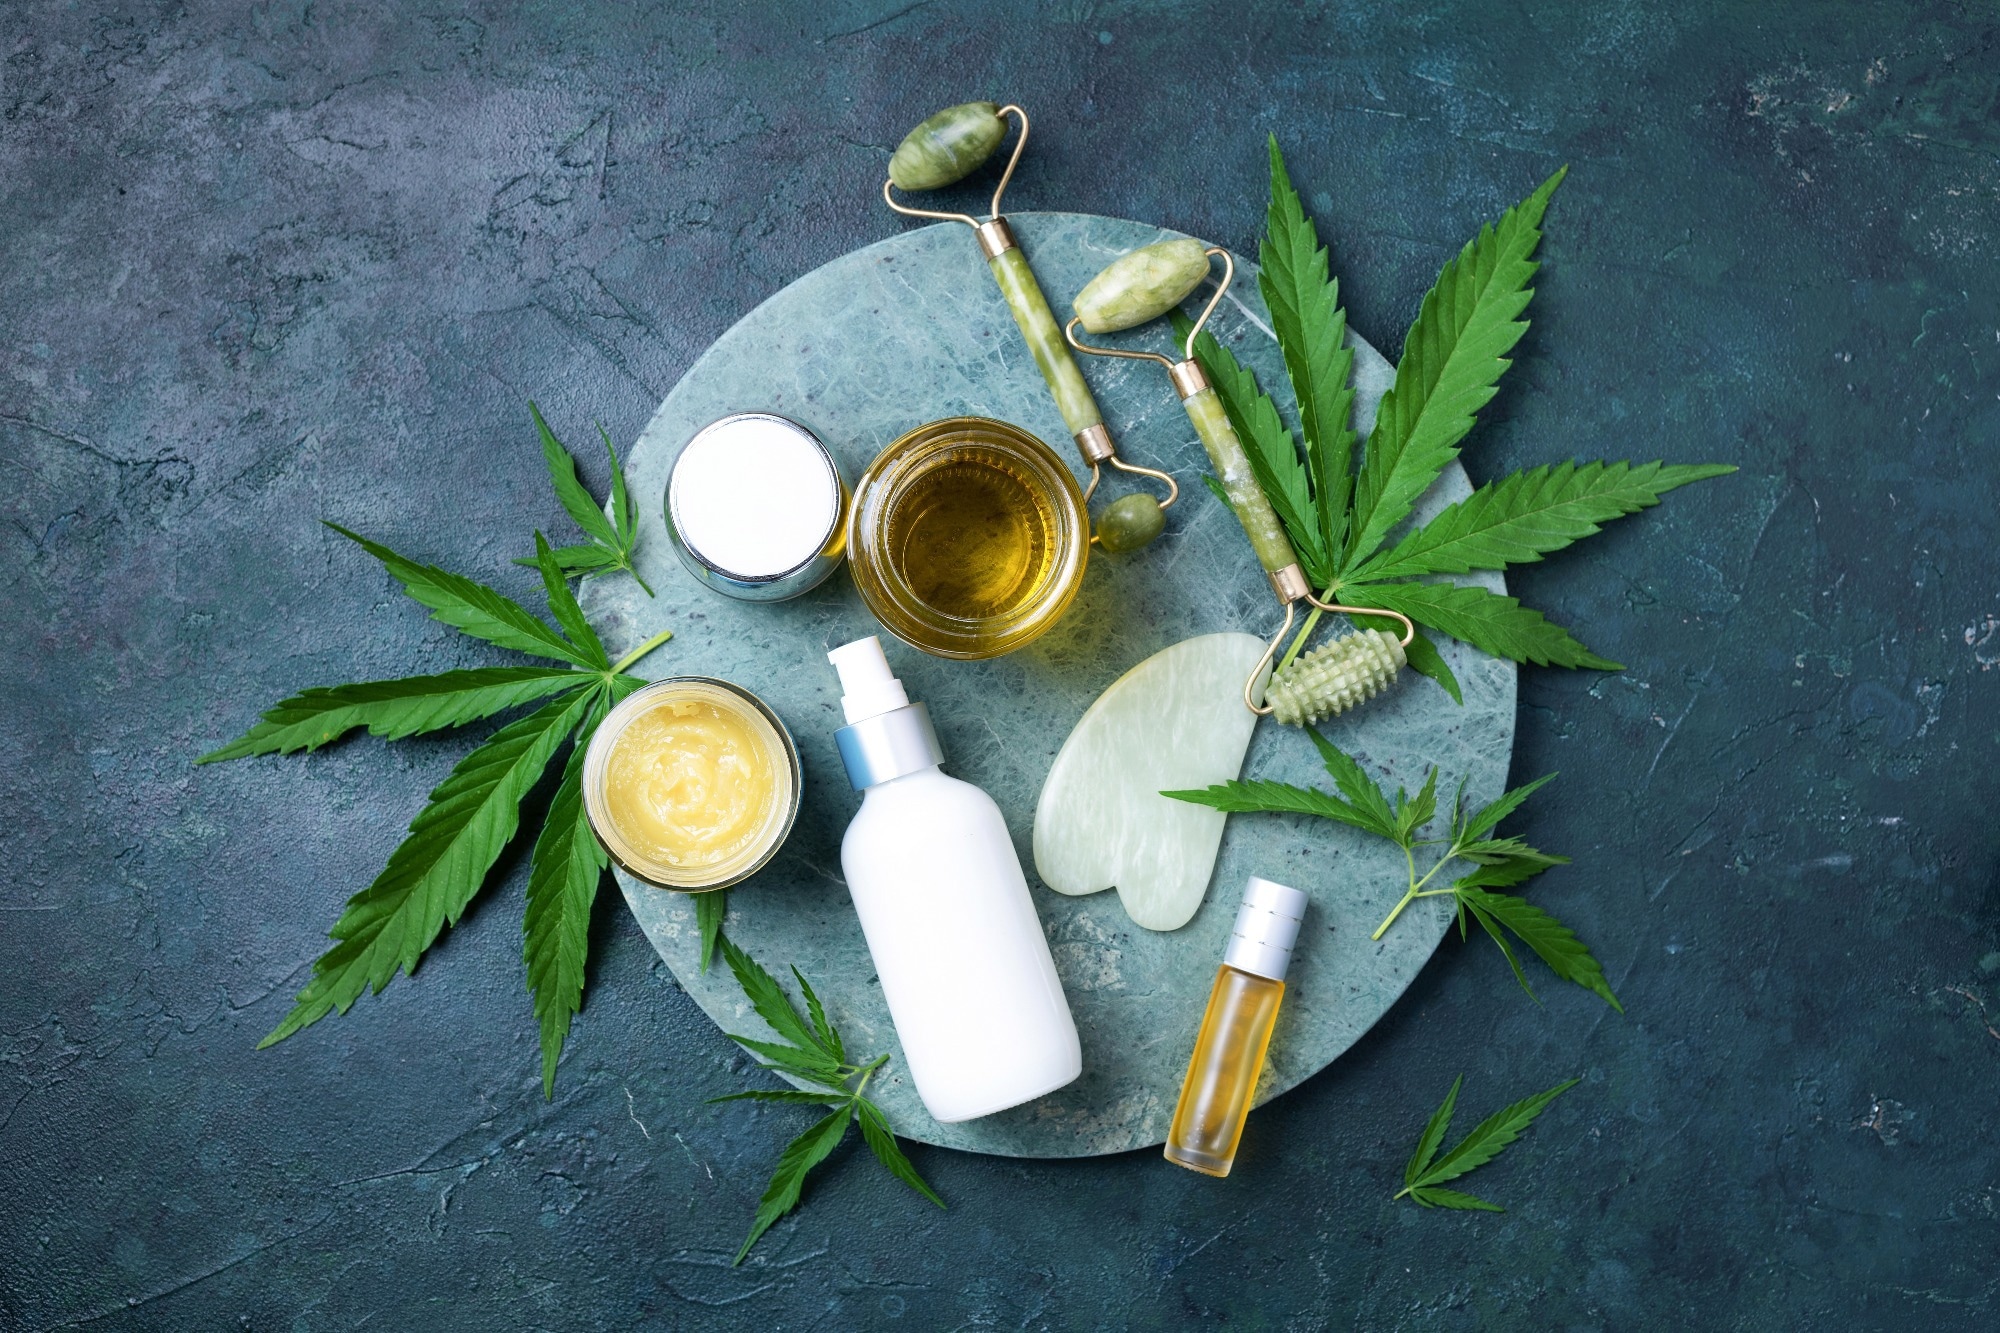 Study: In vitro, ex vivo, and clinical evaluation of anti-aging gel containing EPA and CBD. Image Credit: j.chizhe / Shutterstock.com